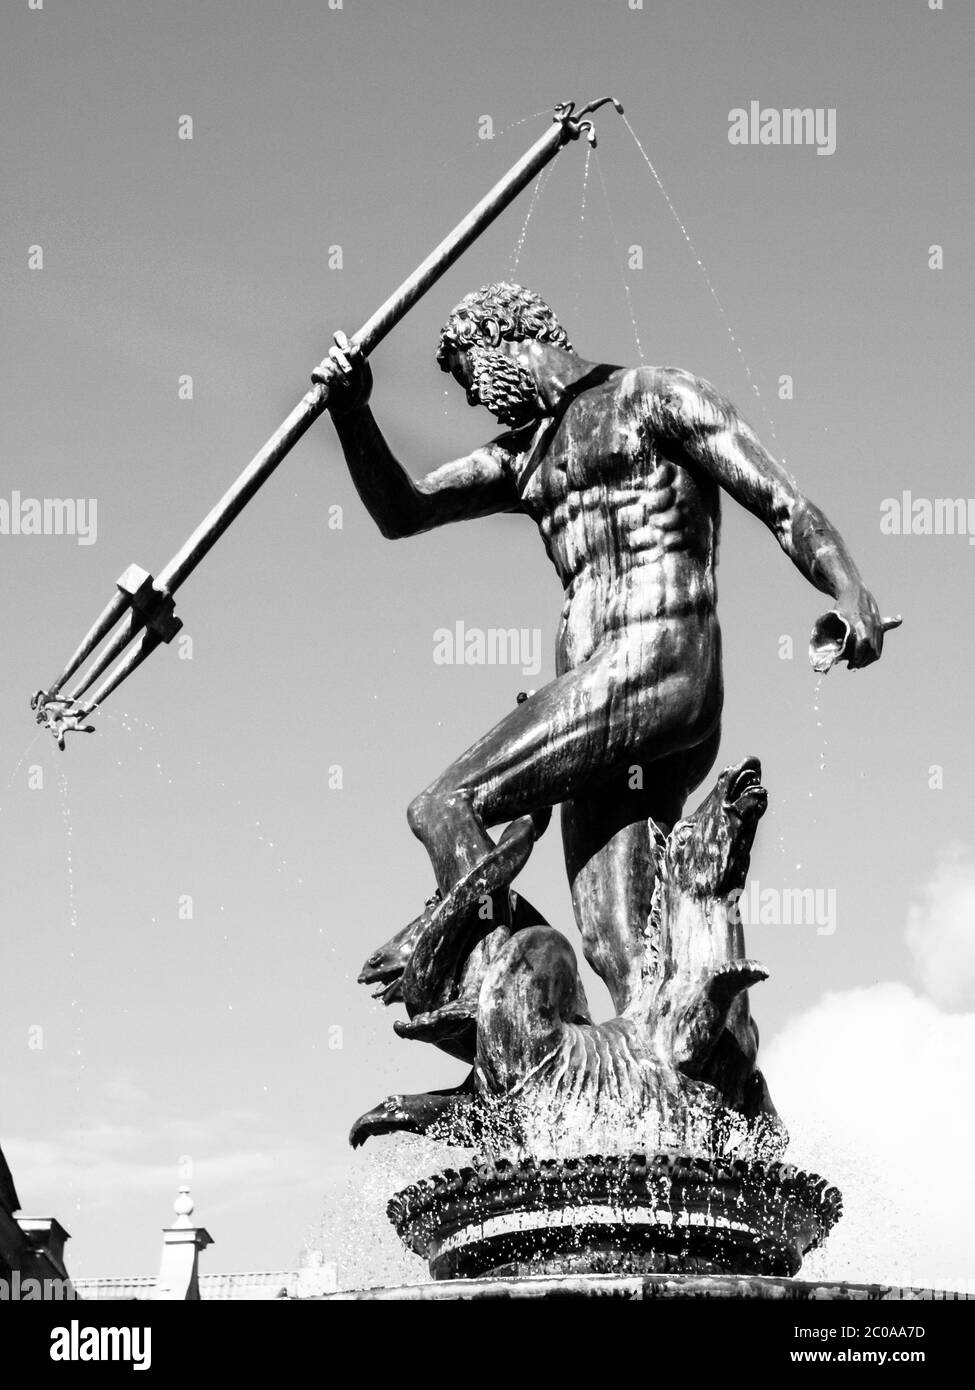 Bronze statue of Neptune, the Roman God of the sea, in Old Town of Gdansk, Poland. Black and white image. Stock Photo